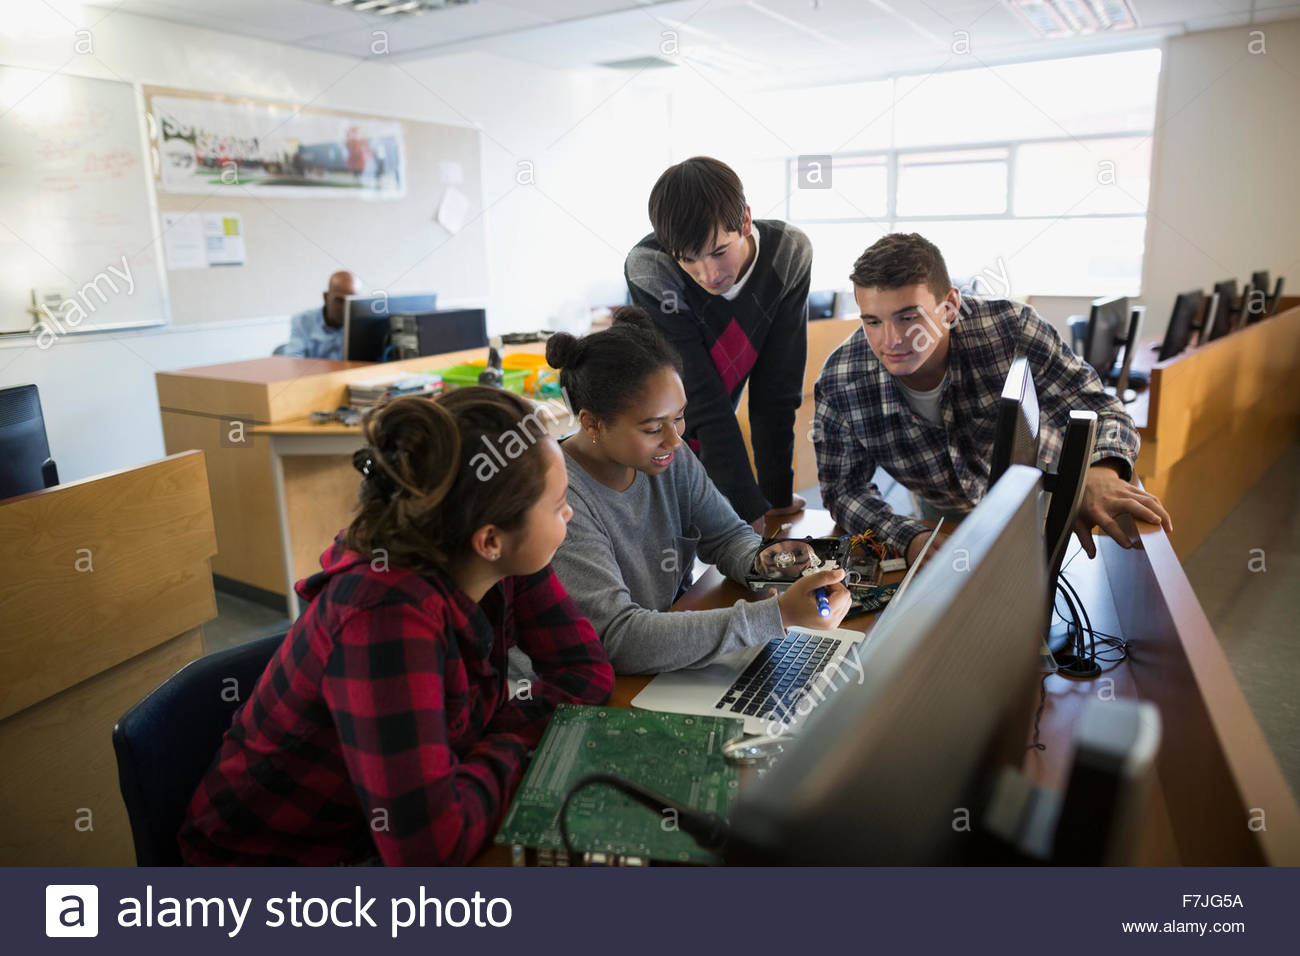 High school students examining electronics part computer science Stock Photo